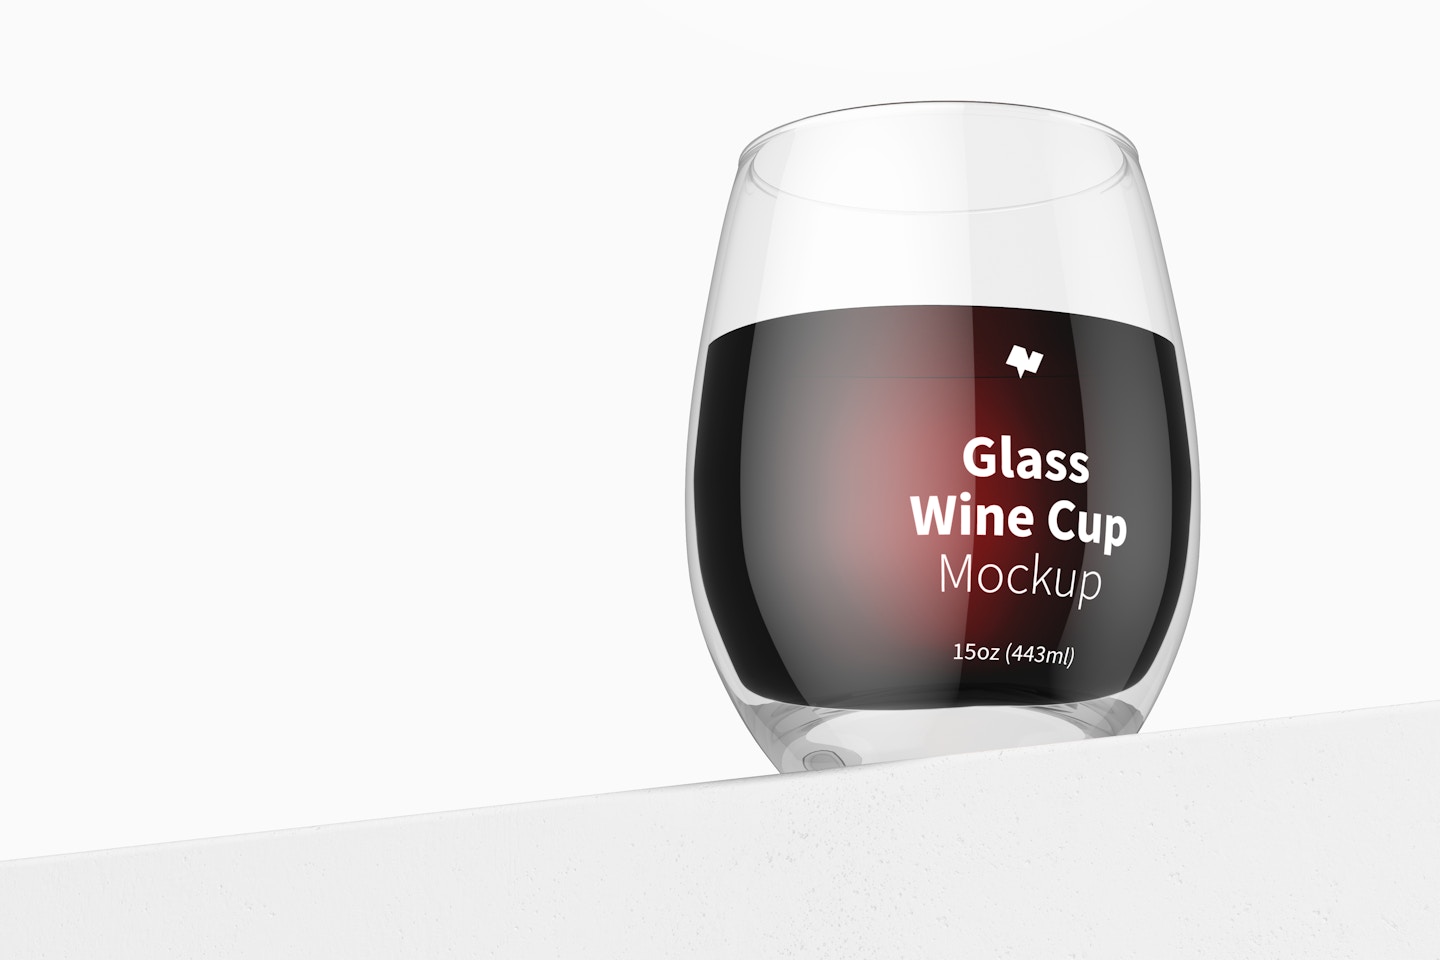 15 oz Glass Wine Cup Mockup, Perspective